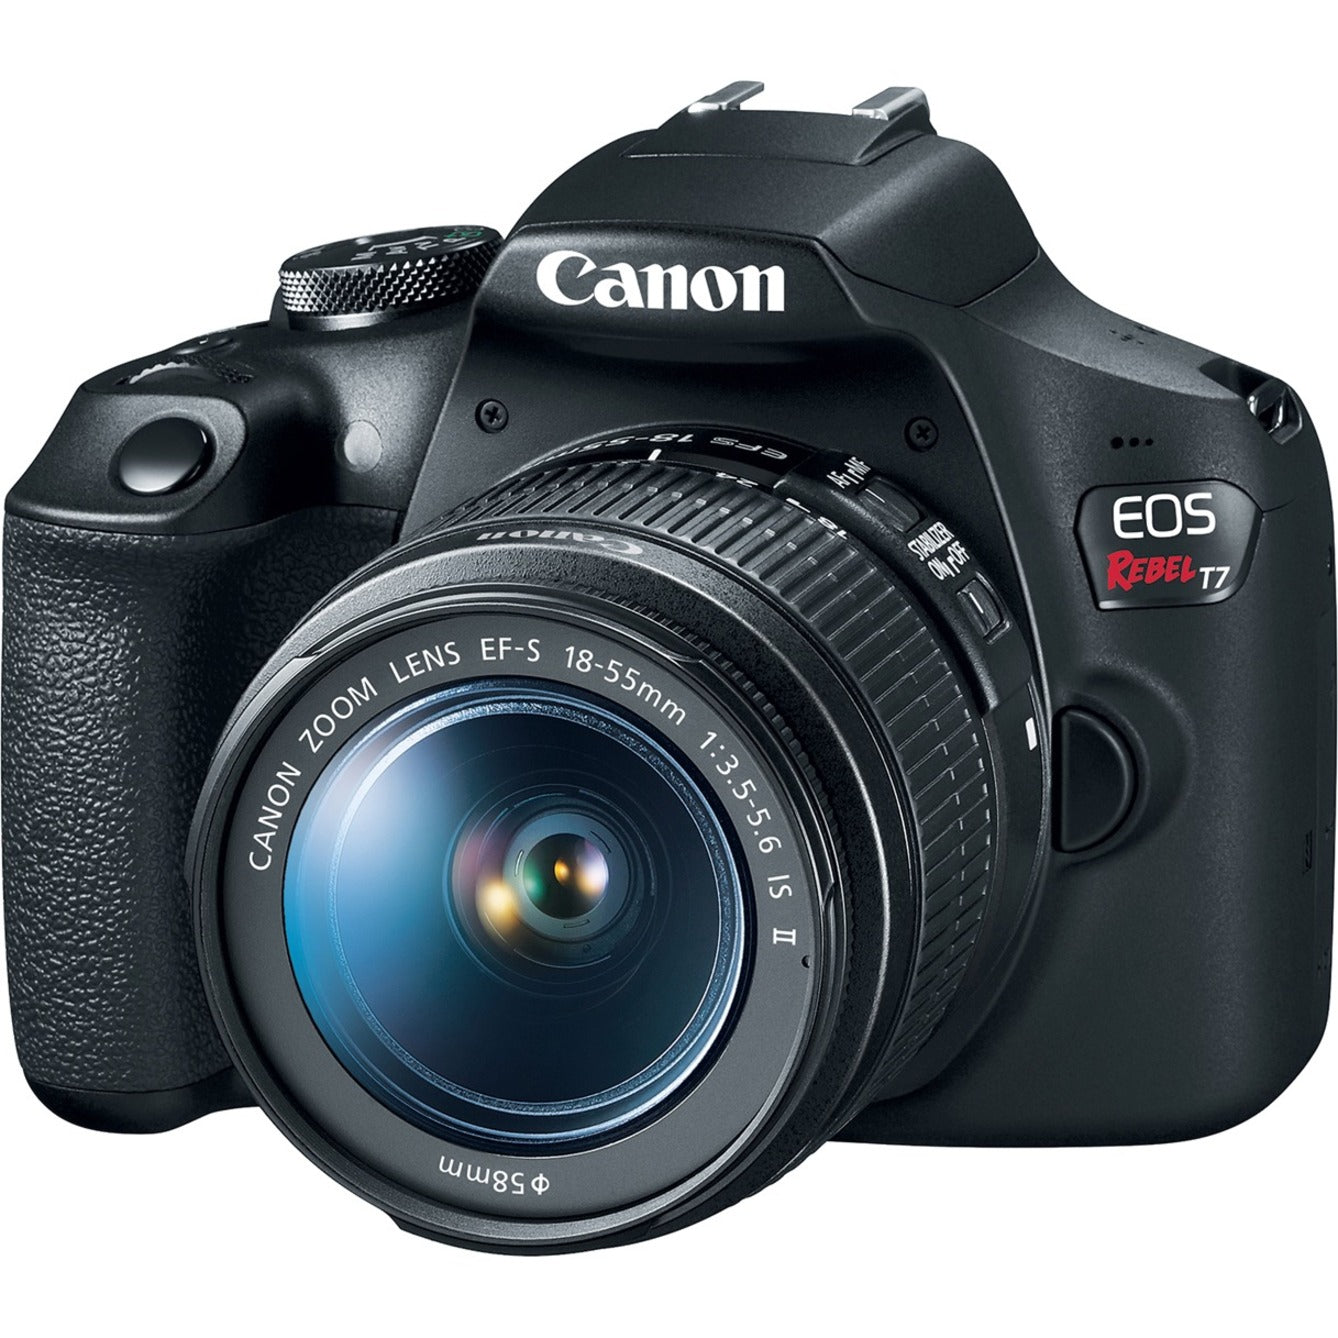 Canon 2727C002 EOS Rebel T7 Digital SLR Camera with Lens, 24.1 Megapixel, 3" LCD, 1920 x 1080 Video